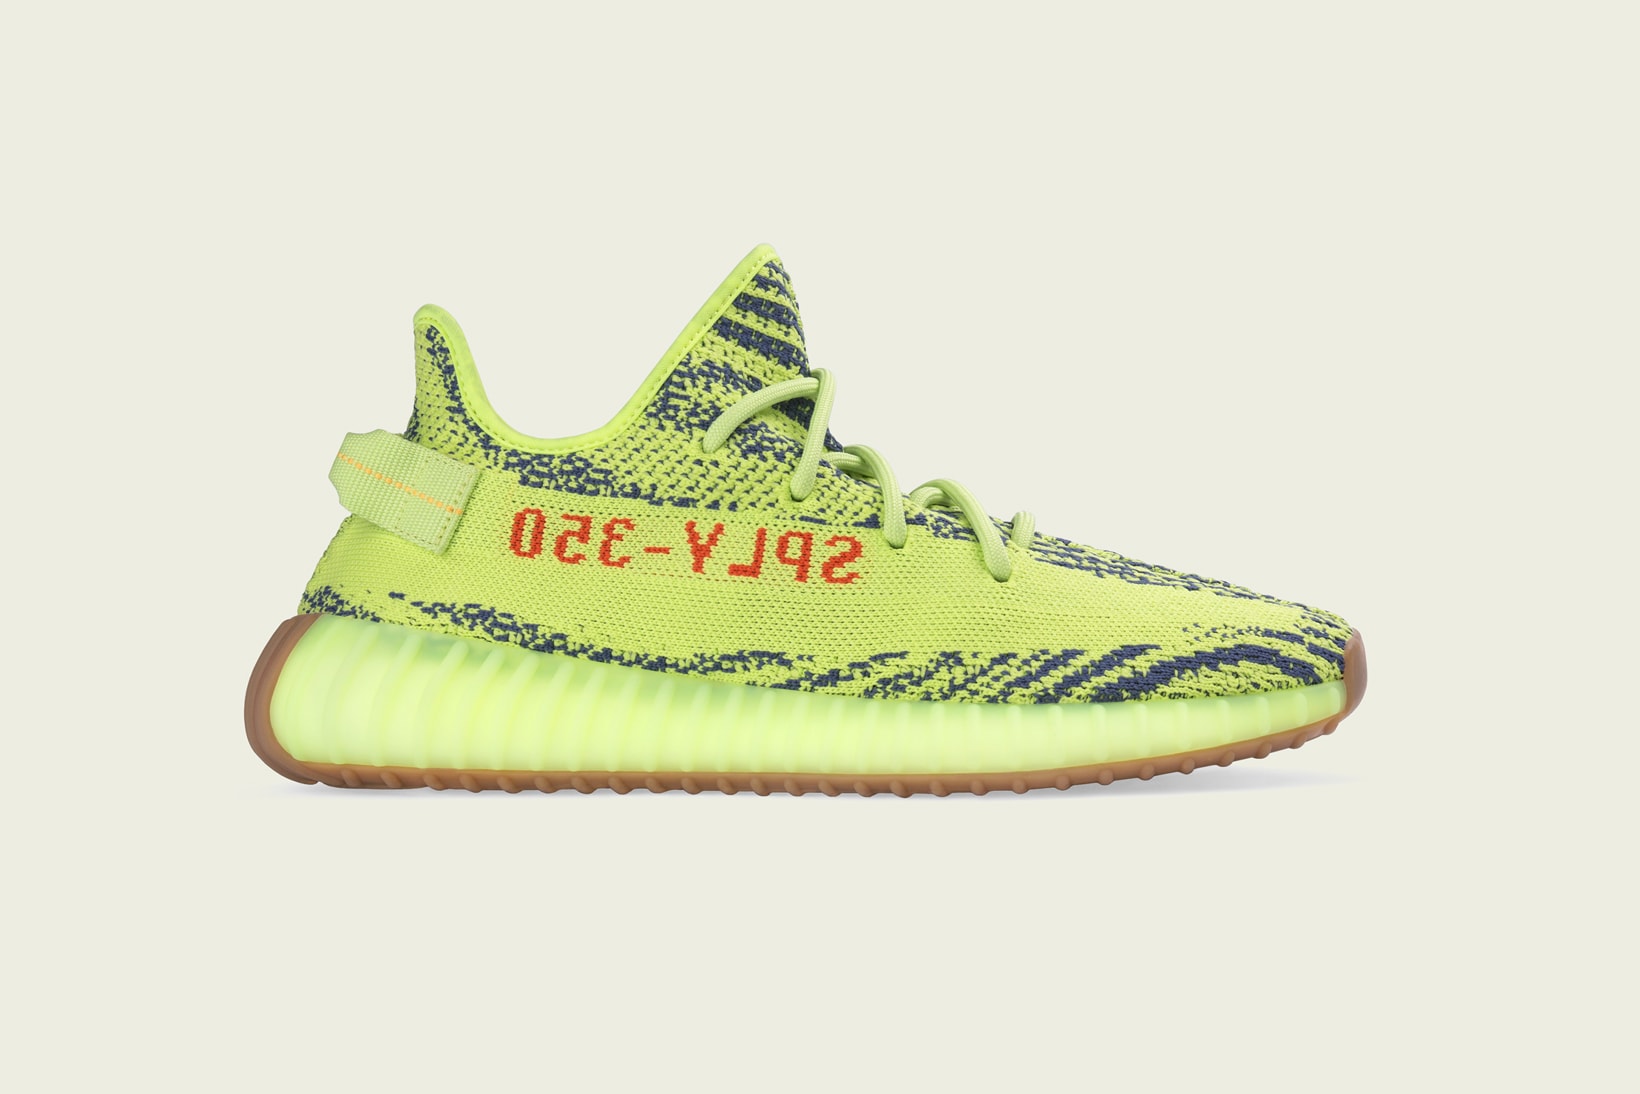 adidas Originals YEEZY BOOST 350 V2 Semi Frozen Yellow Raw Steel Red Release Date Info Drops November 18 2017 Kanye West Sneakers Cheeseburger